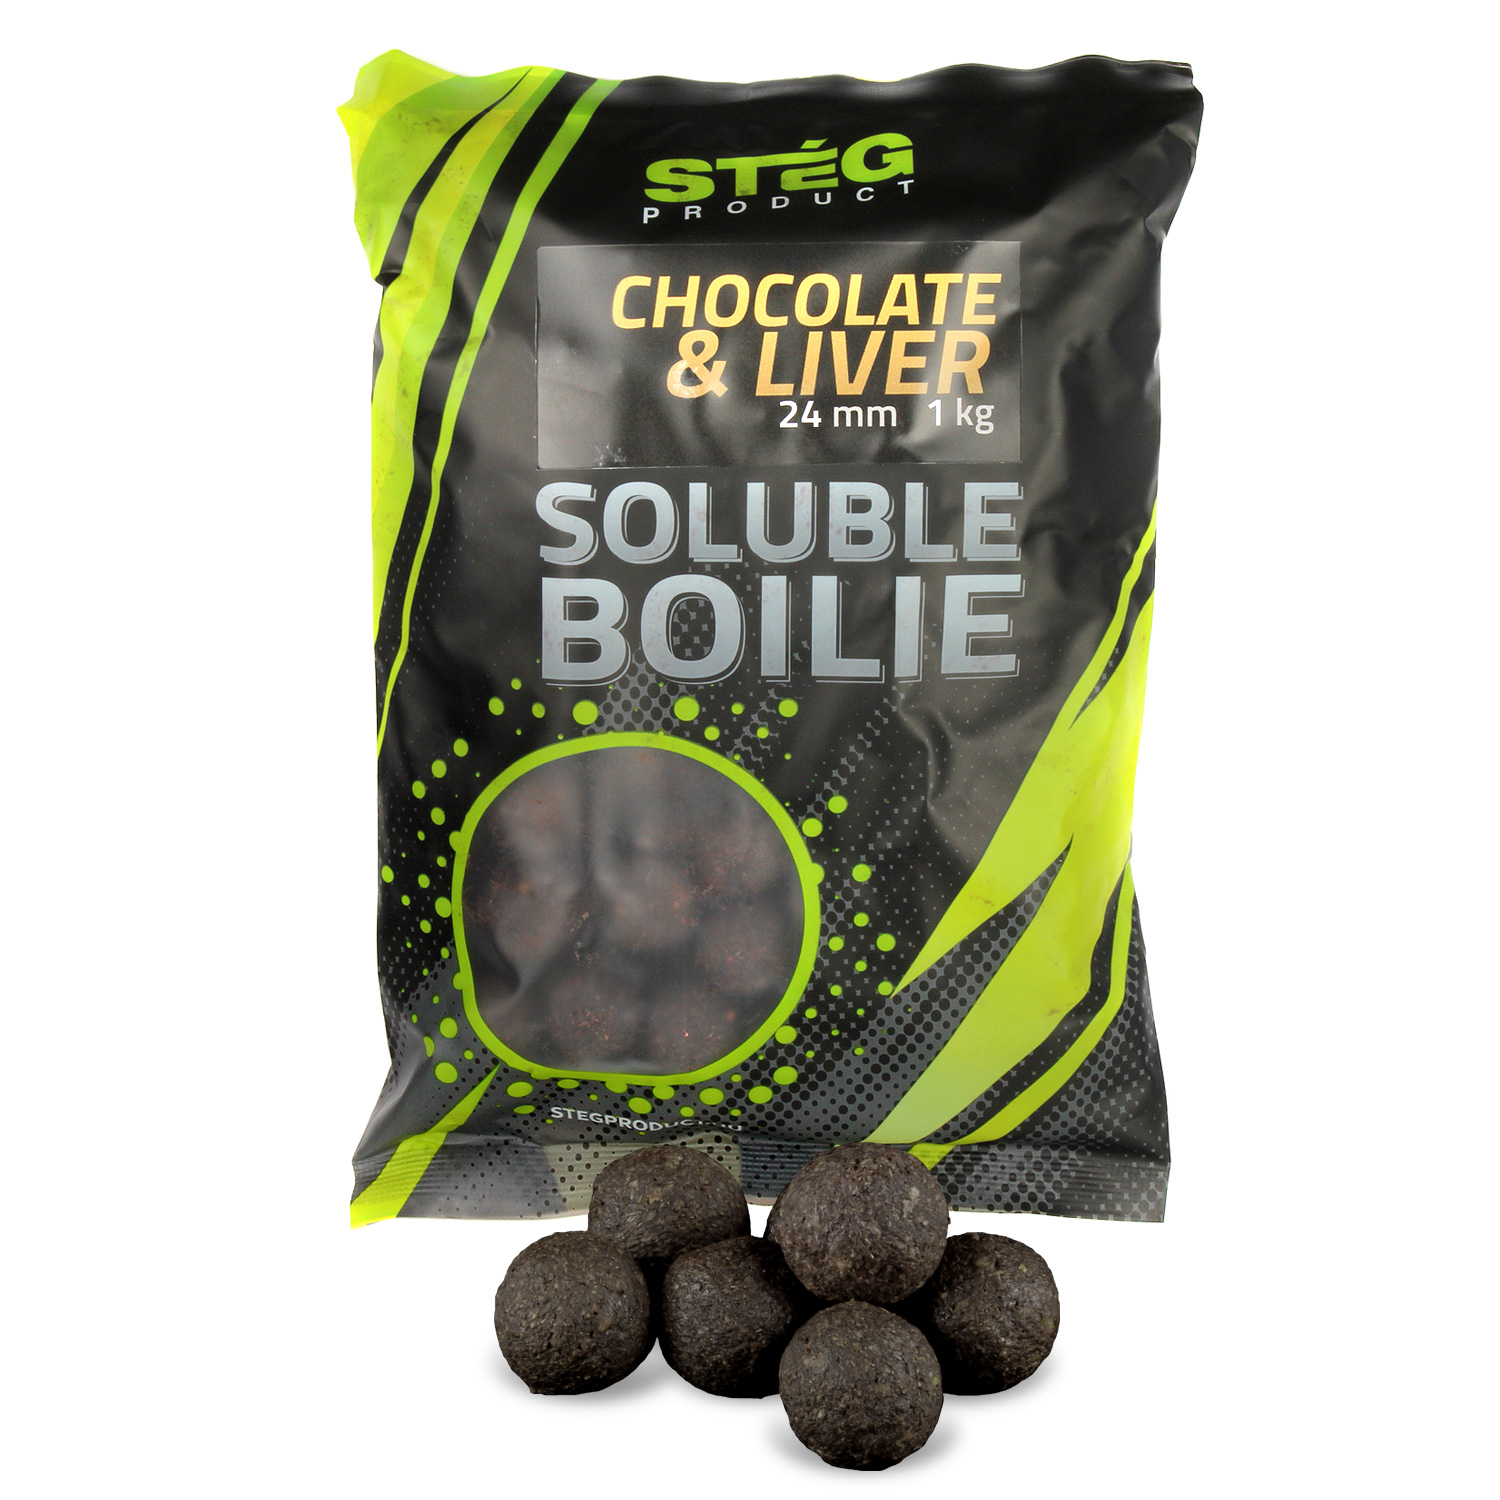 Stg Product Soluble Boilie 24mm Chocolate&Liver 1kg